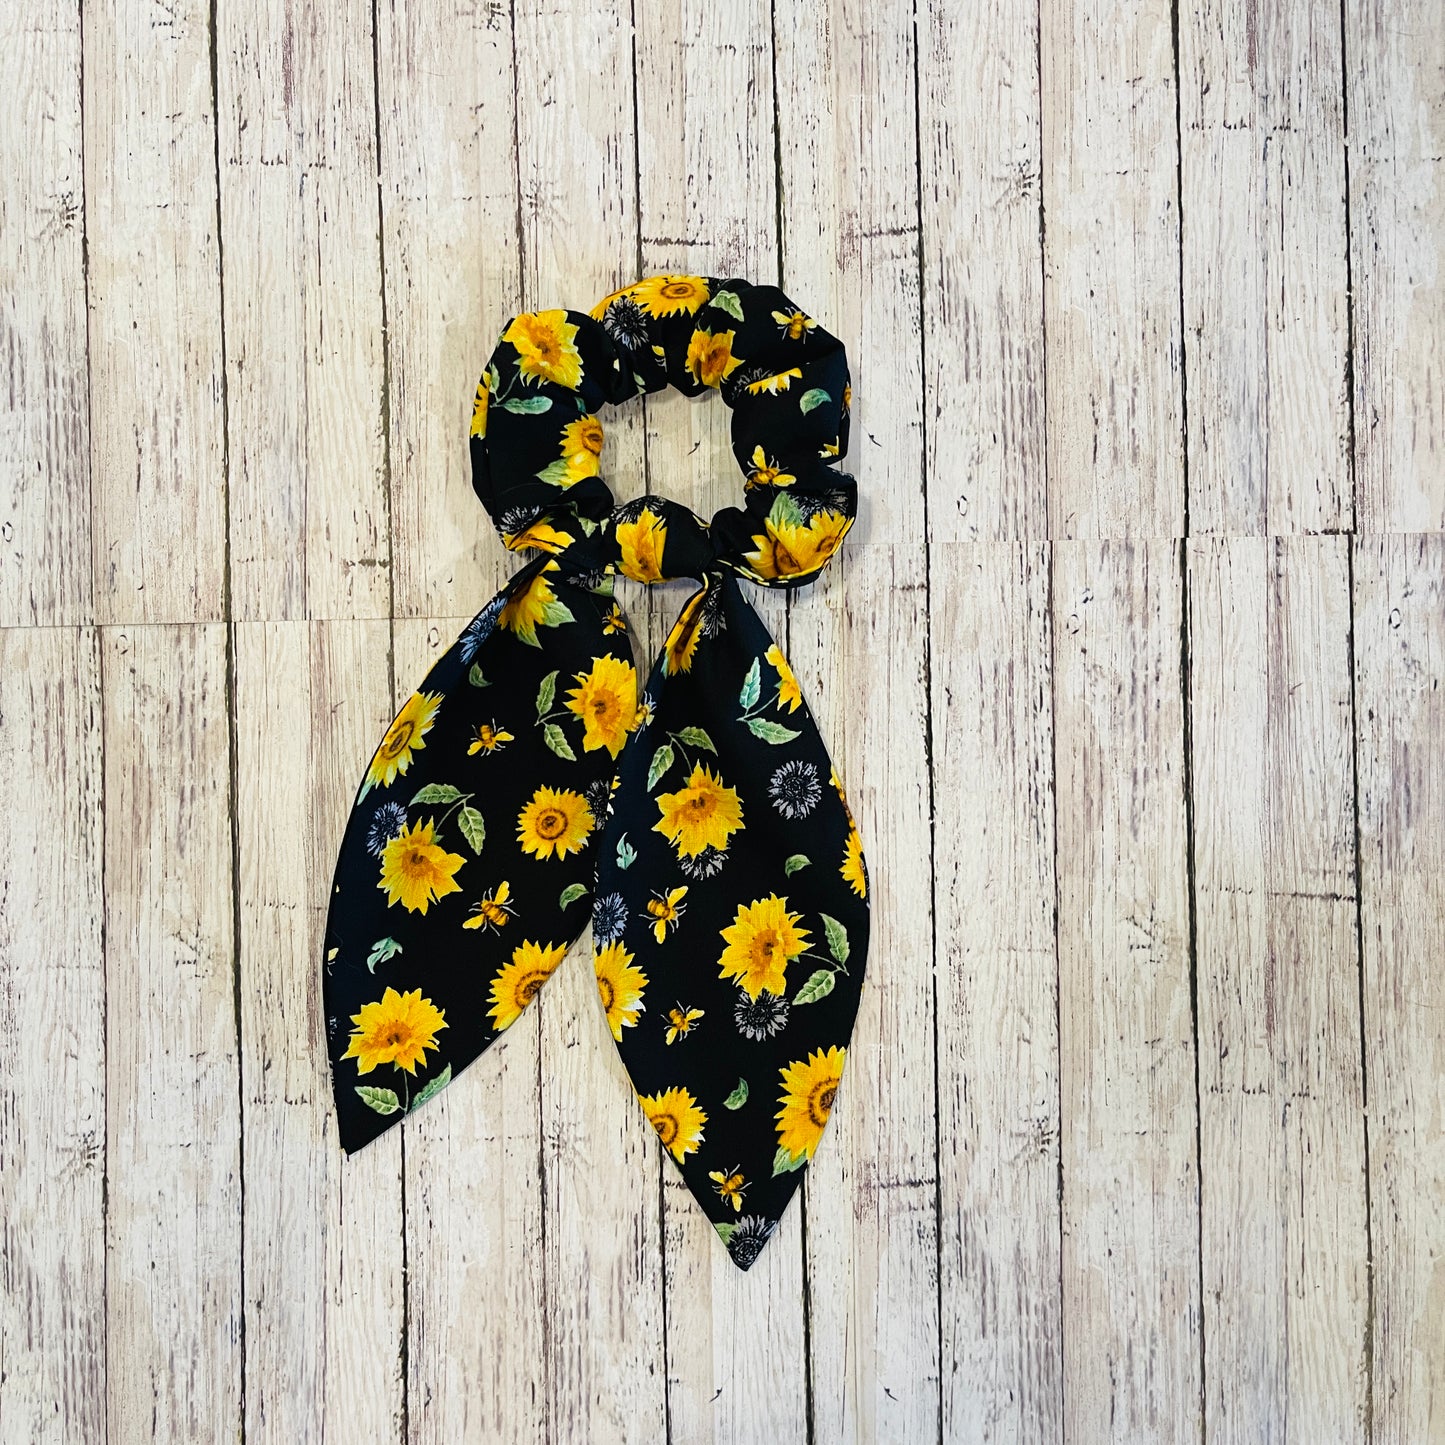 Sunflower & Bees Scrunchies with Tails